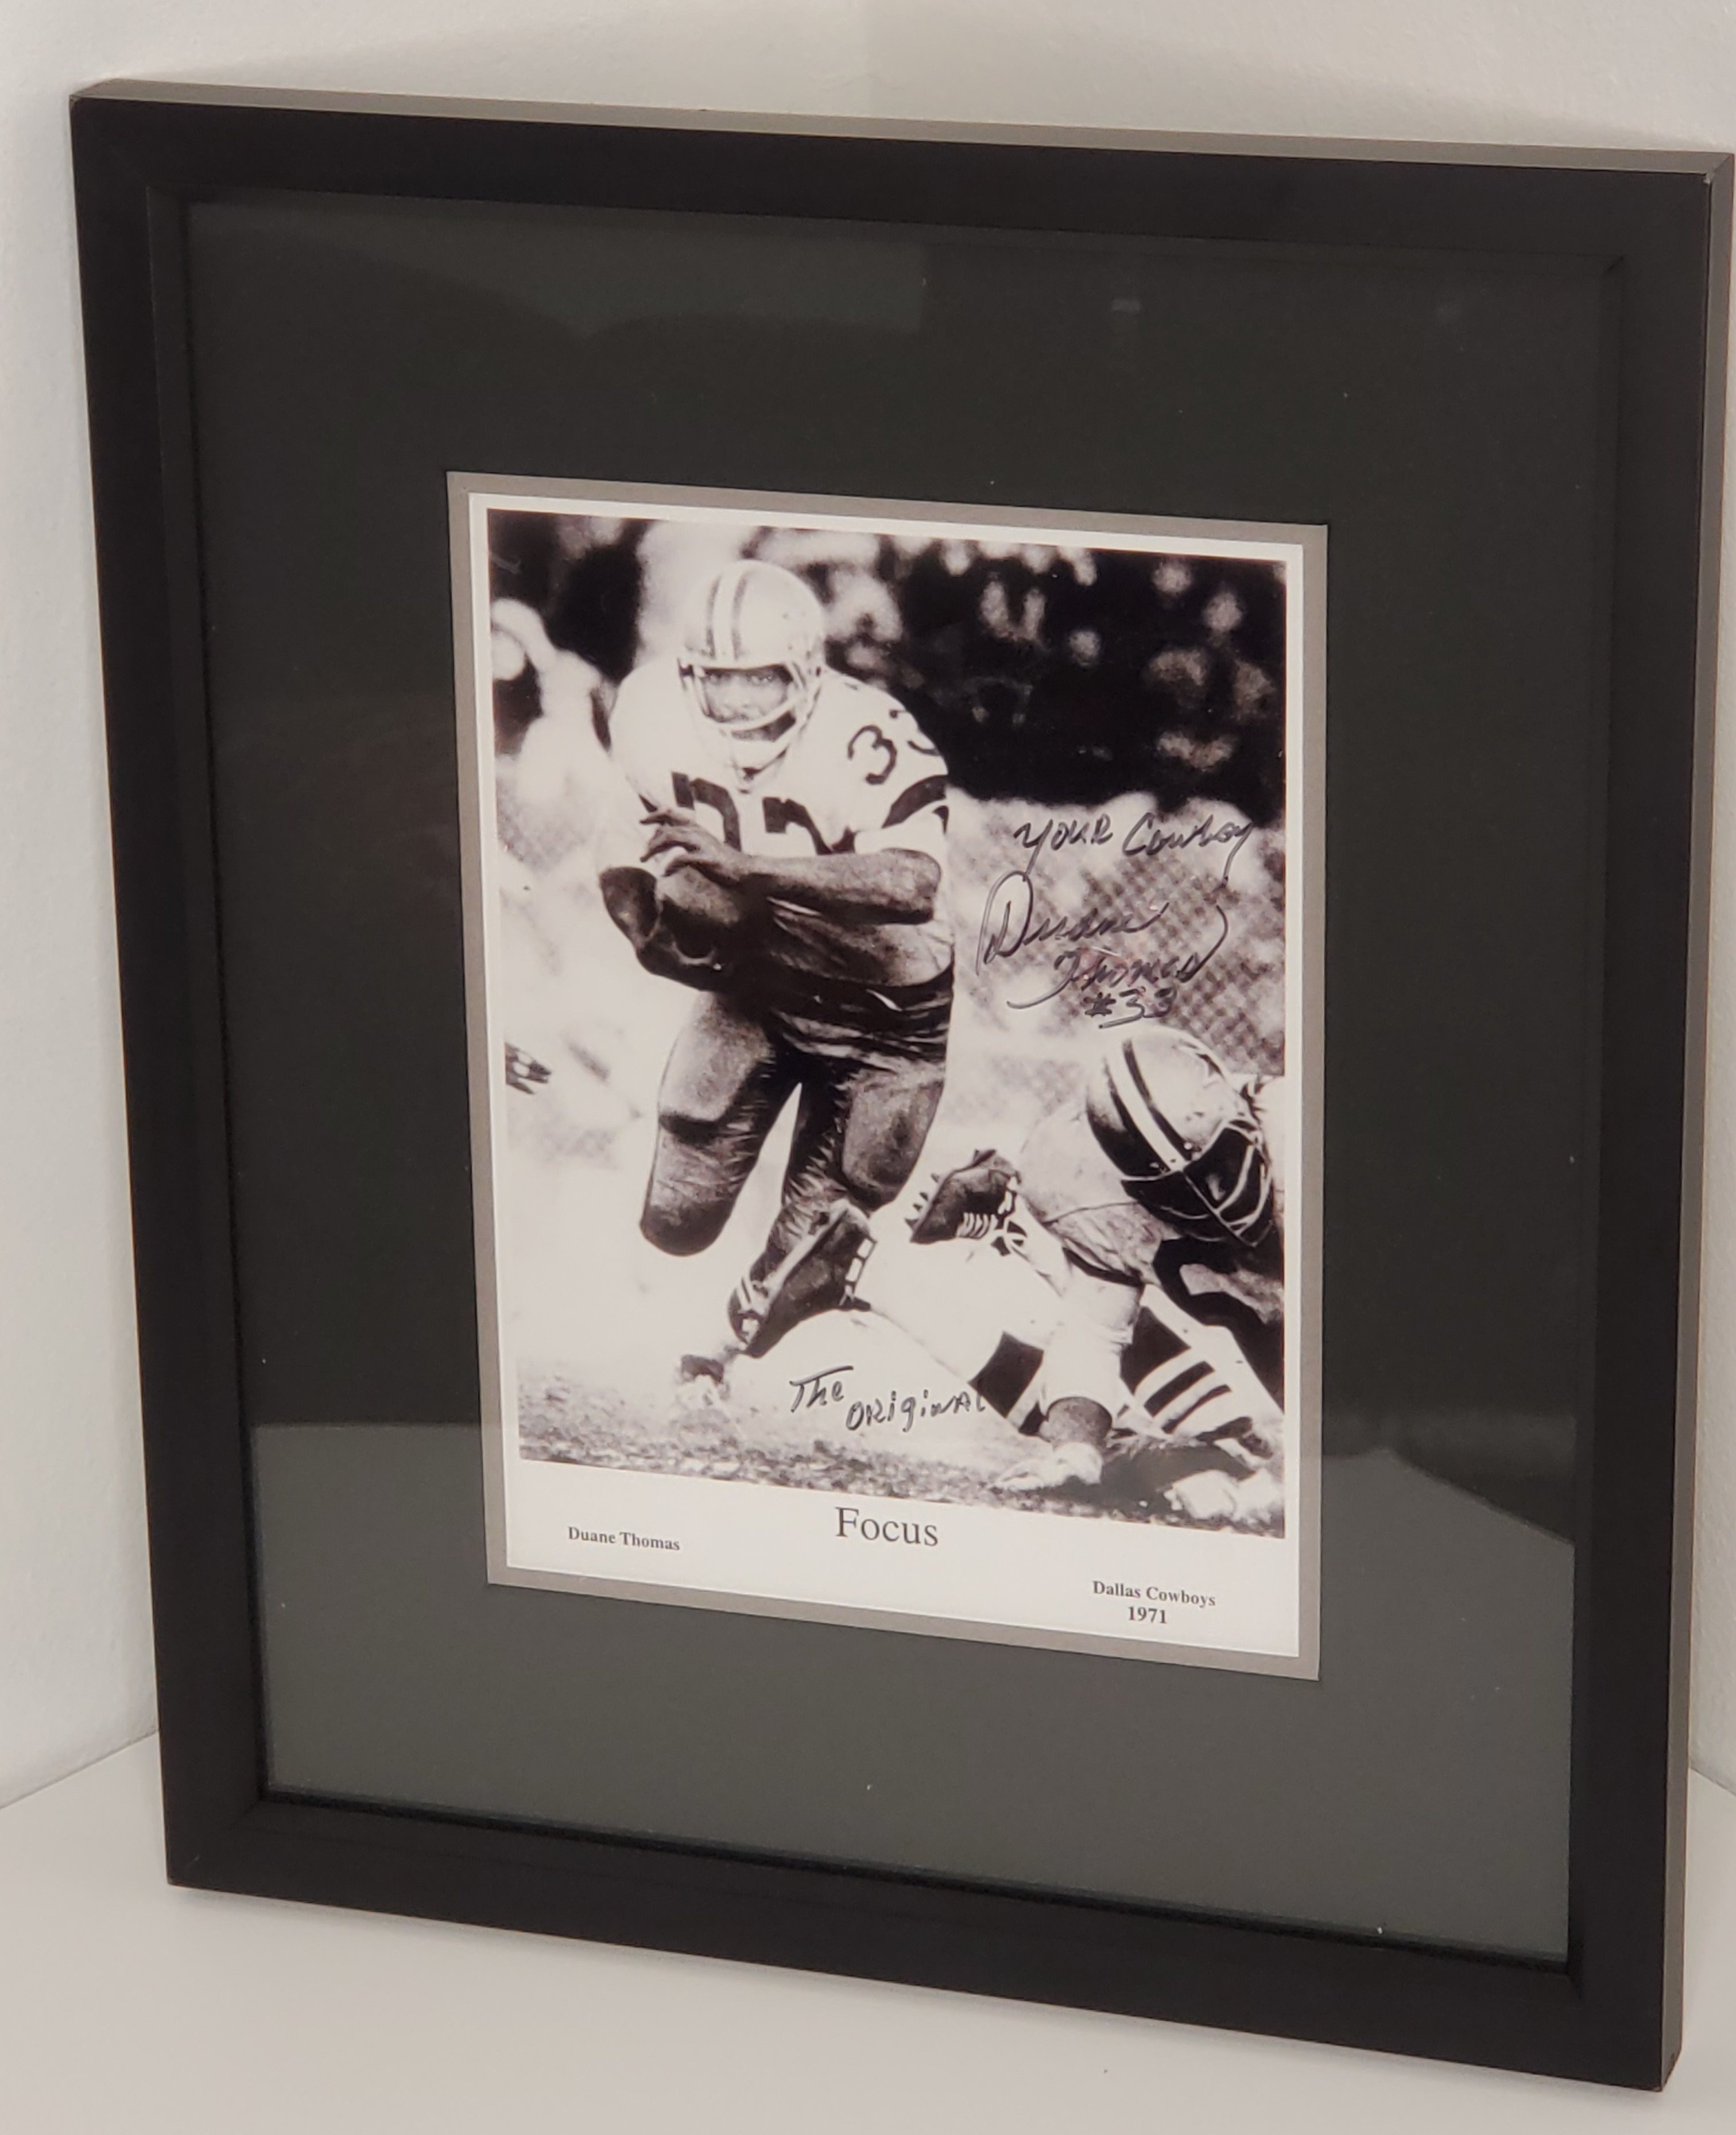 Autographed, framed and matted 8 X10 photo of Super Bowl Champ (Dallas Cowboys) Duane Thomas.